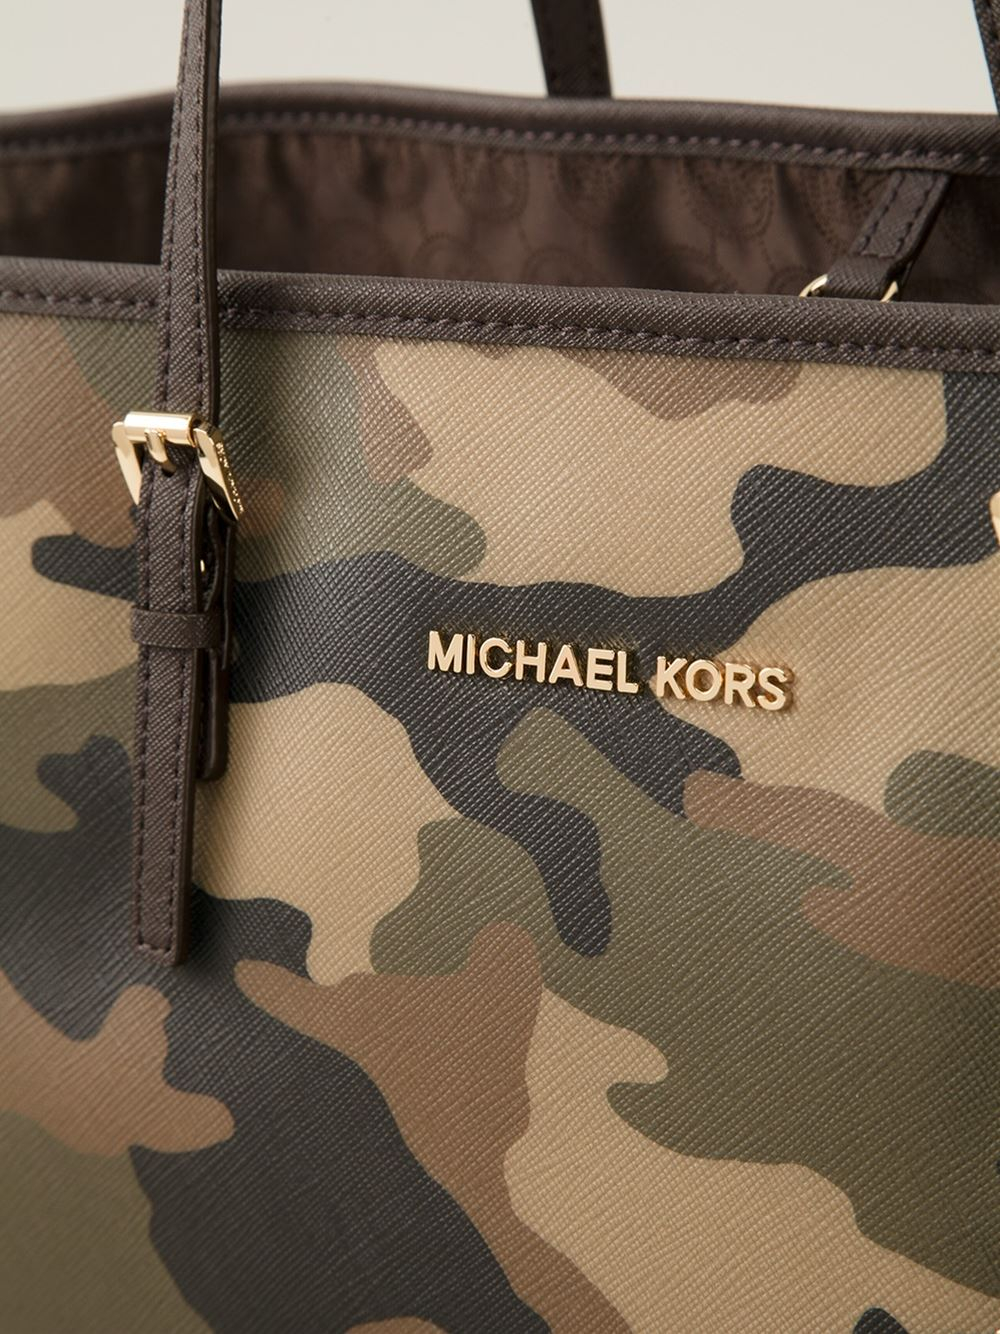 MICHAEL Michael Kors Camouflage 'Jet Set' Tote in Green | Lyst